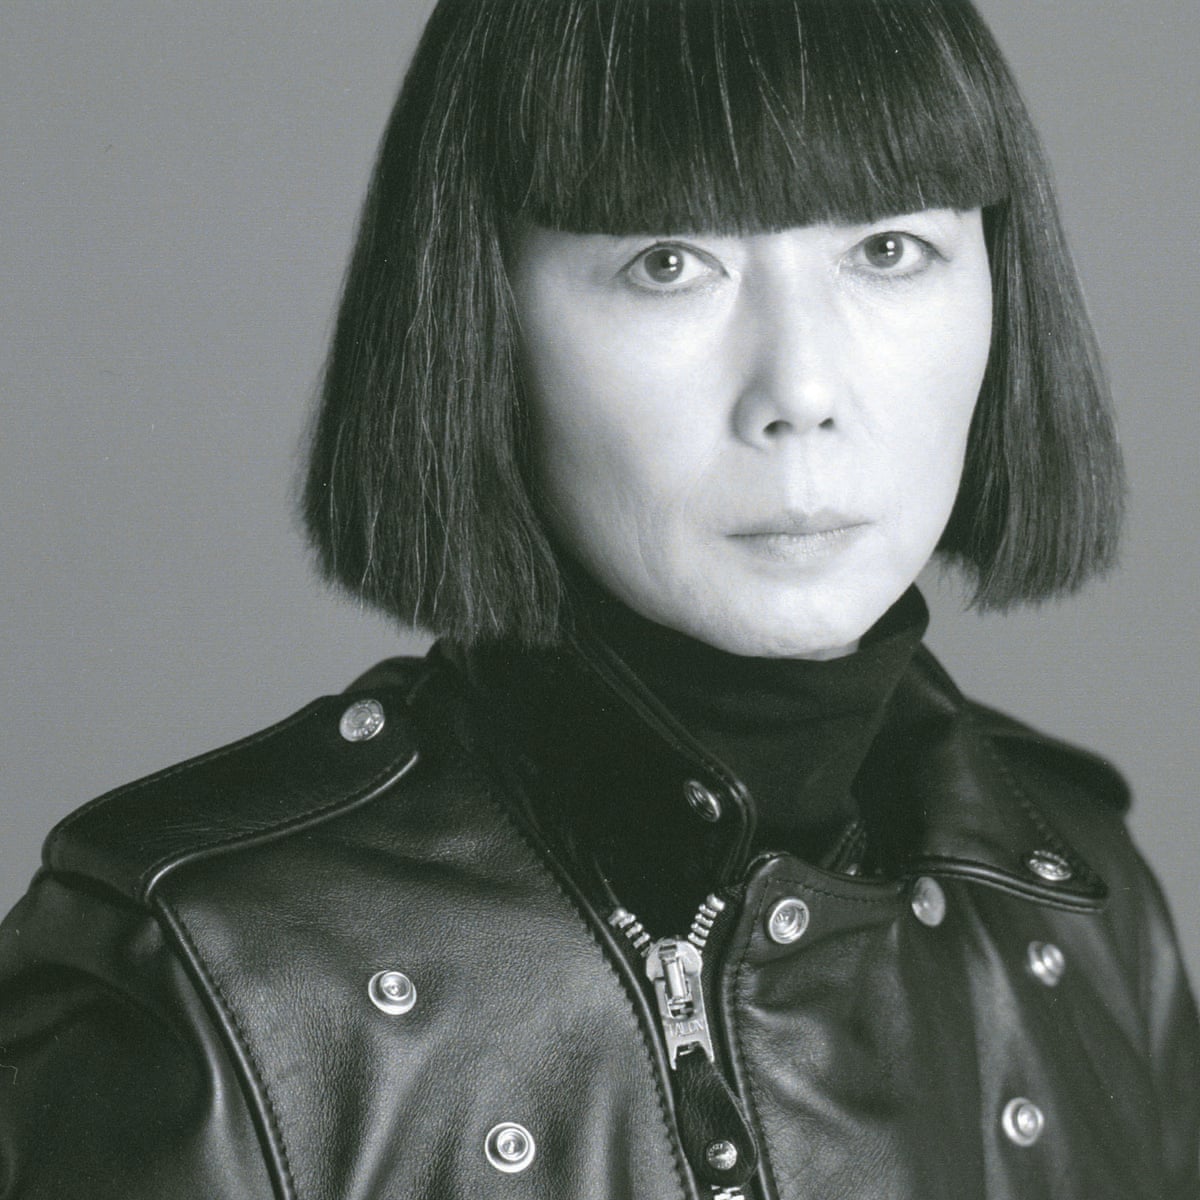 Rei Kawakubo interview: 'Contemporary culture does not allow for nuance' |  Rei Kawakubo | The Guardian